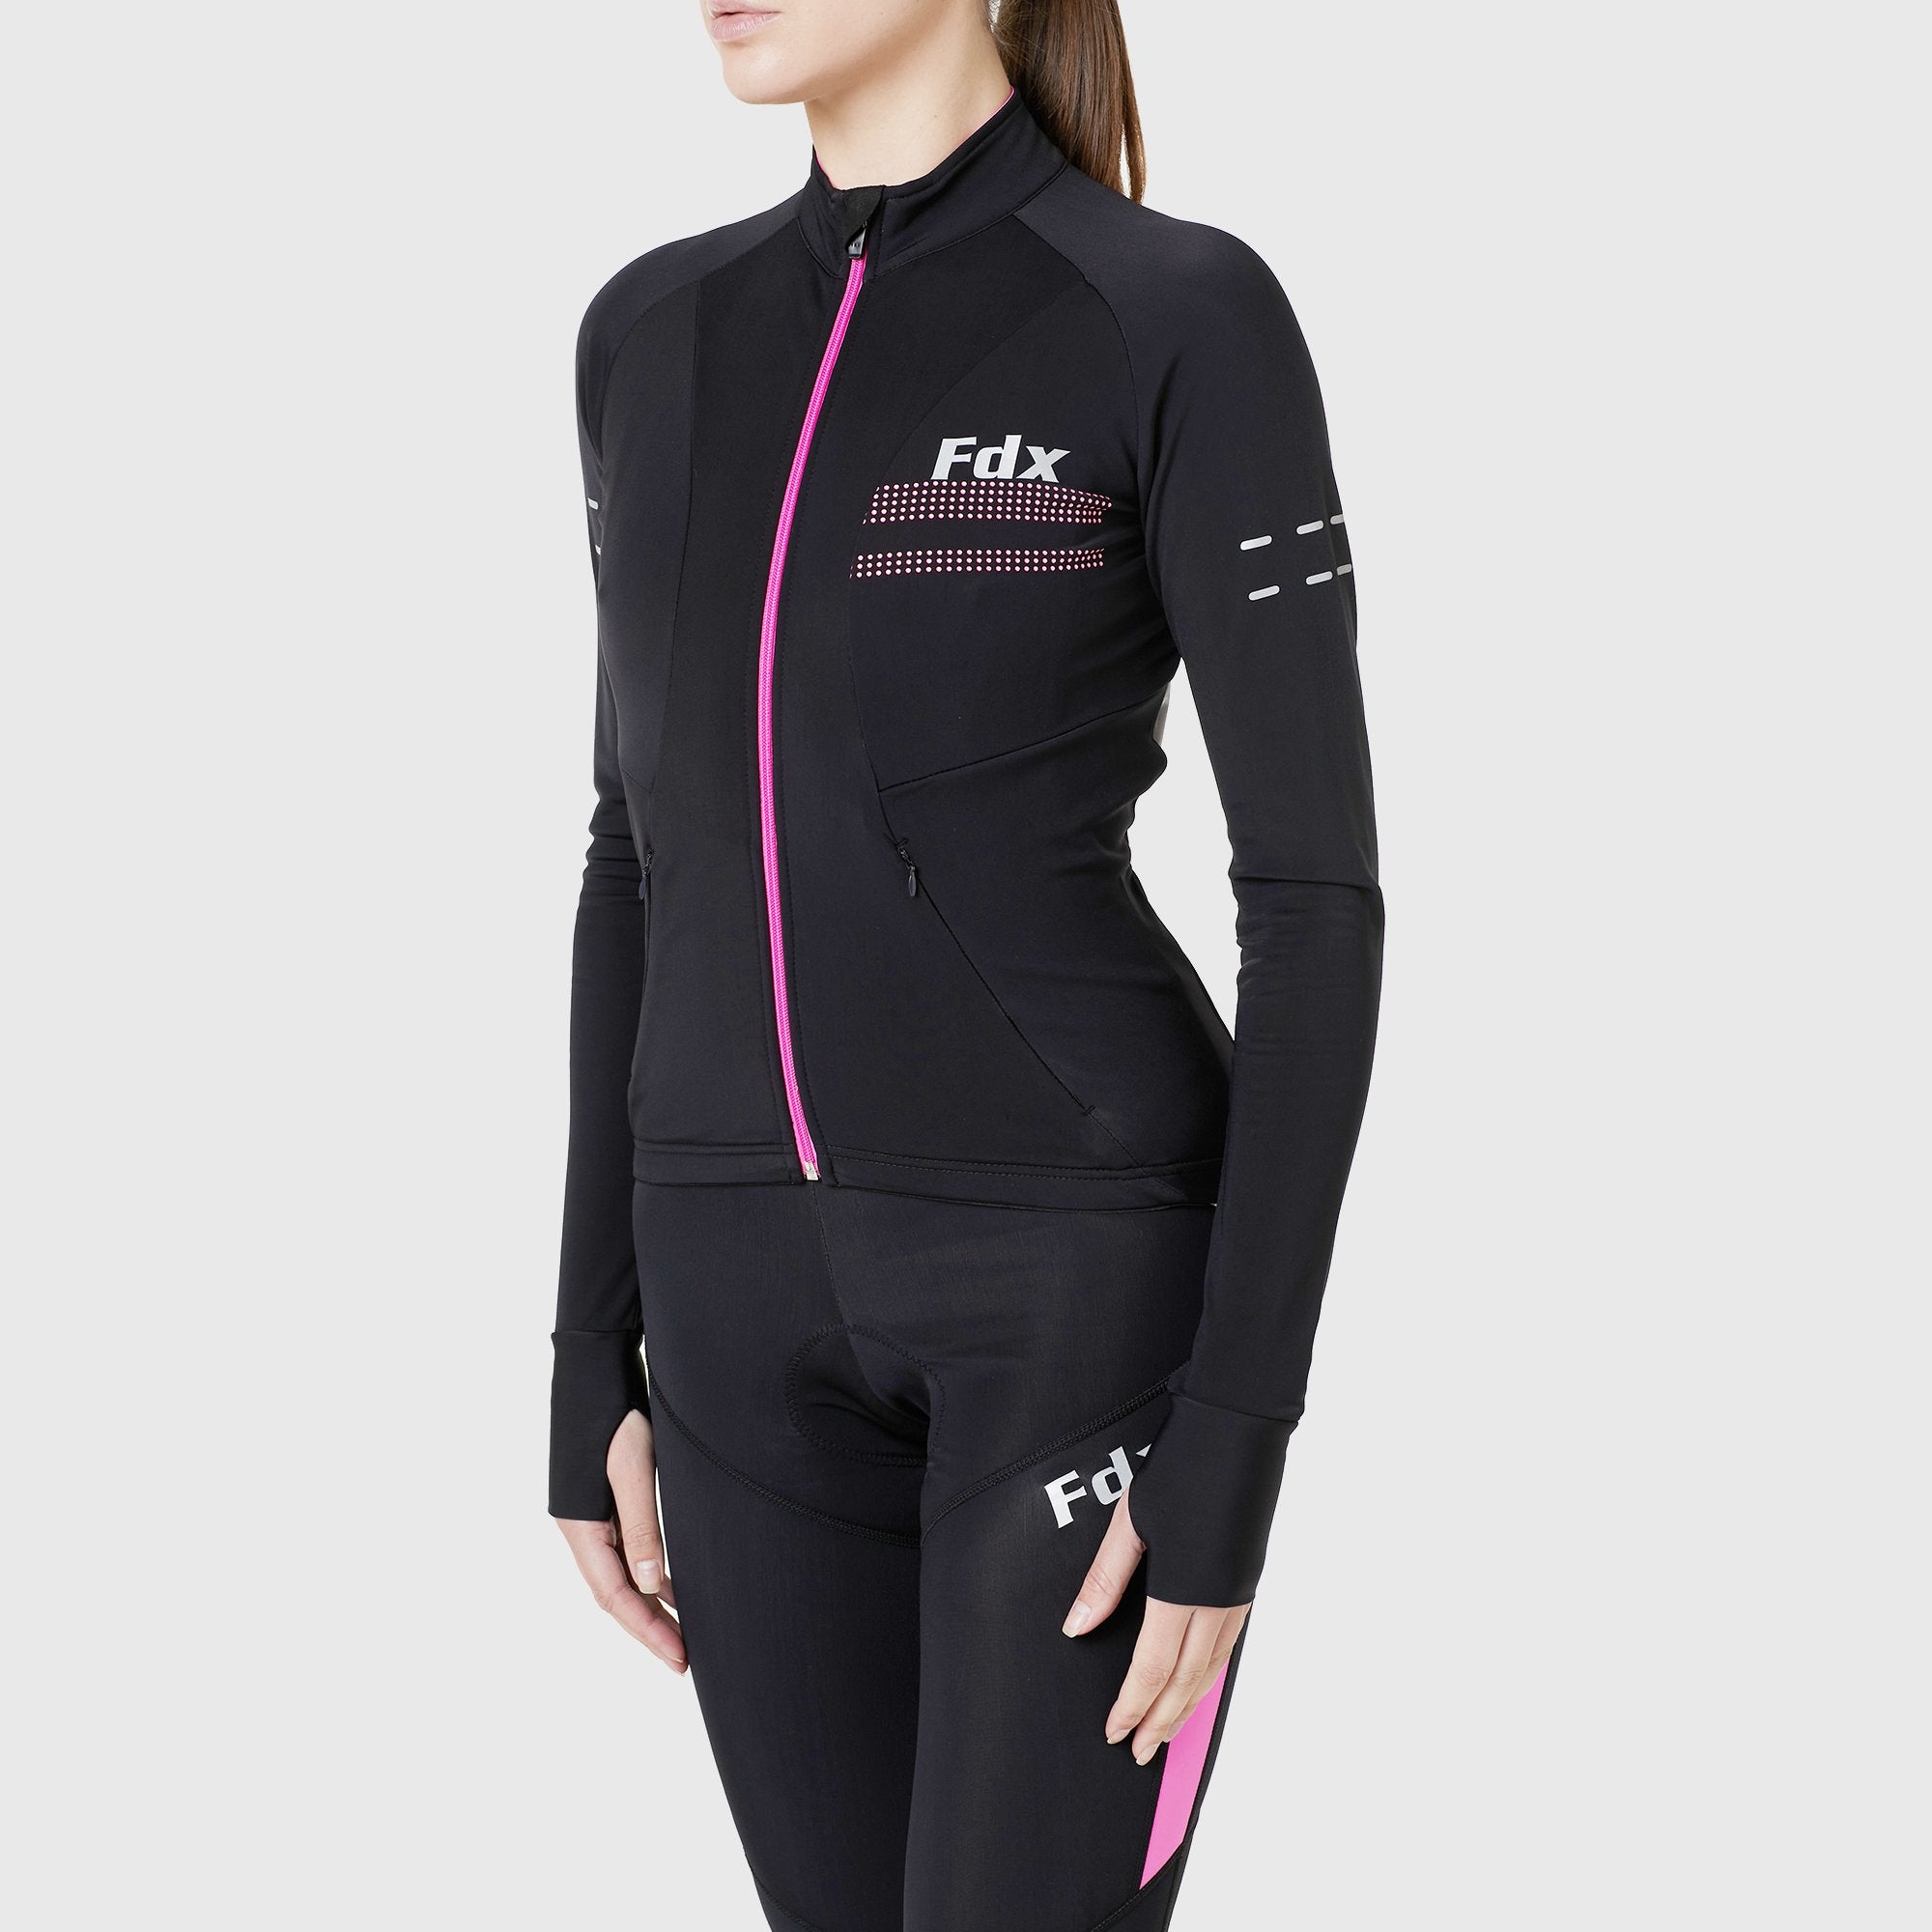 Fdx Arch Women's Pink Thermal Roubaix Long Sleeve Cycling Jersey